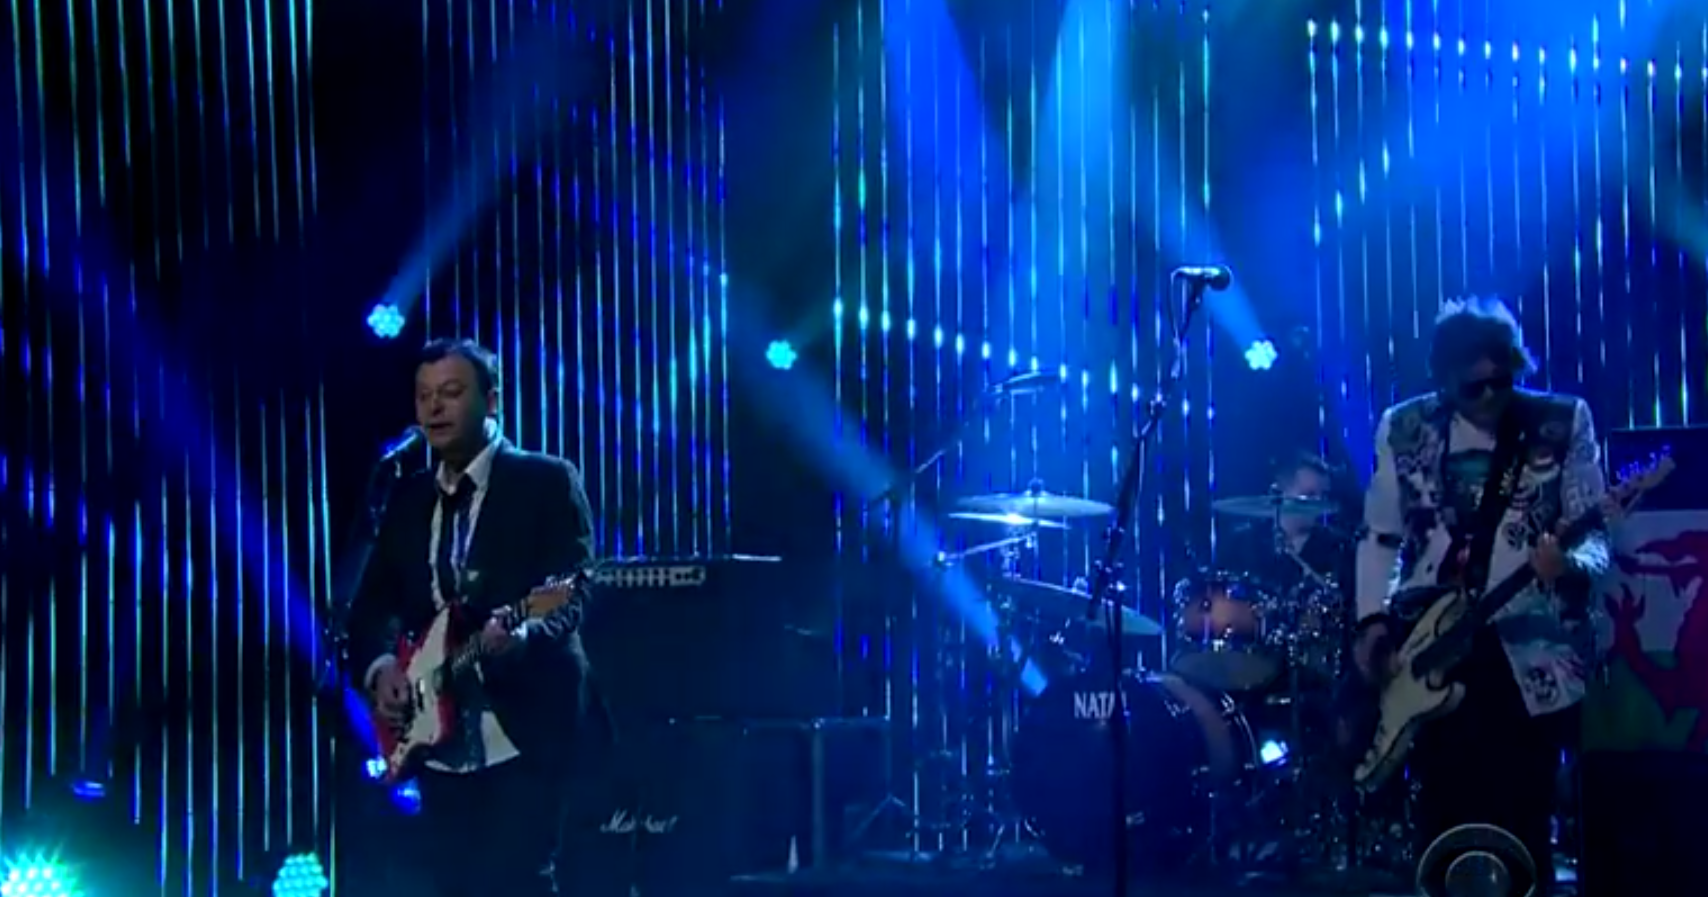 Watch Dave Grohl Help The Bird and the Bee Cover Van Halen on <i>The Late Late Show</i>